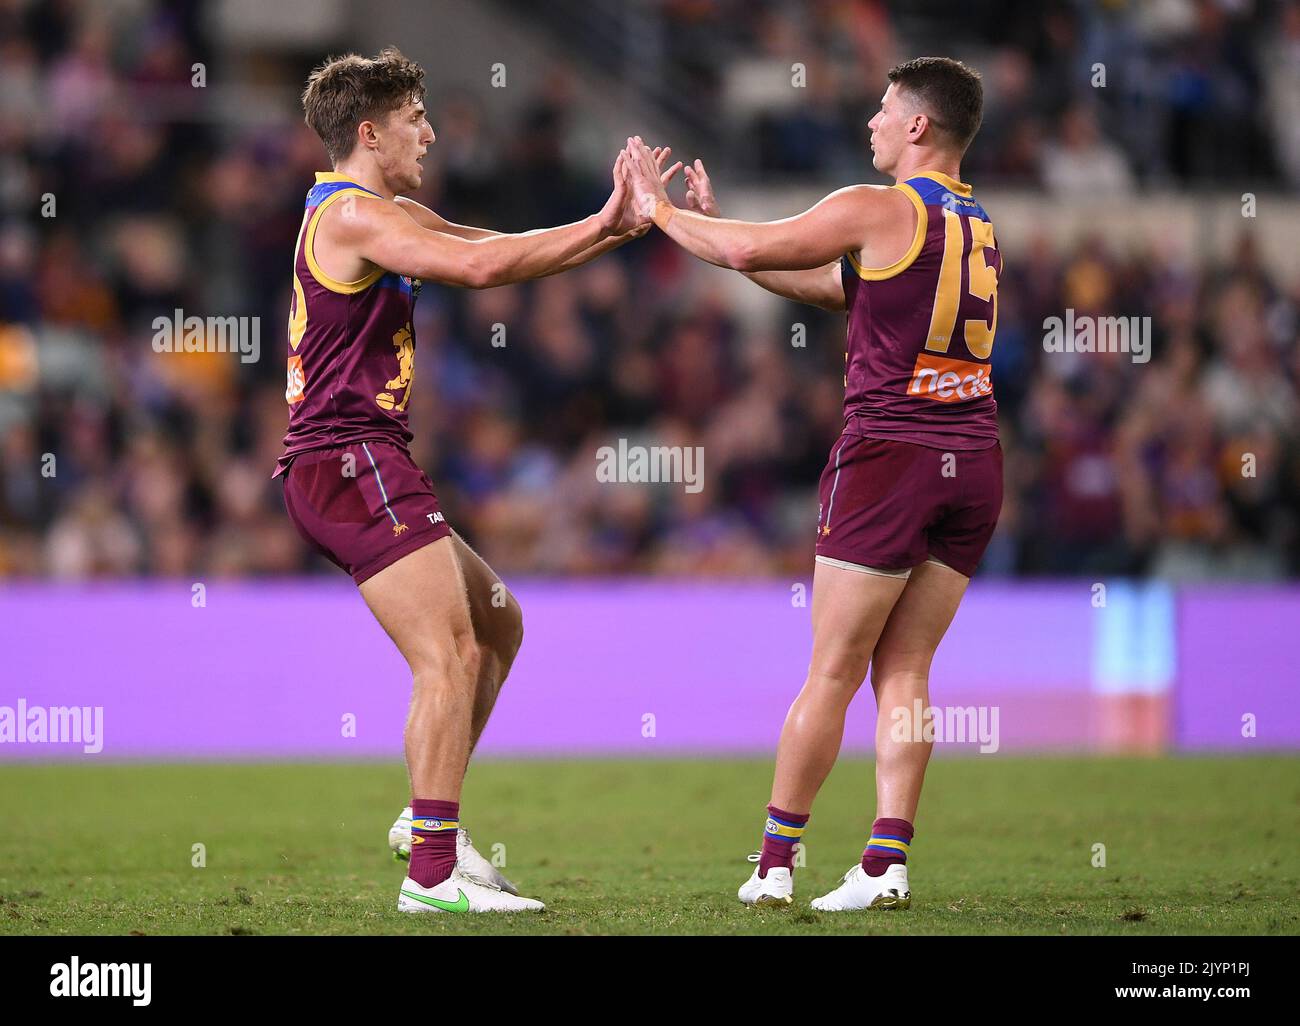 zac-bailey-of-the-lions-left-reacts-with-dayne-zorko-after-kicking-a-goal-during-the-round-10-afl-match-between-the-brisbane-lions-and-richmond-tigers-at-the-gabba-in-brisbane-friday-may-21-2021-aap-imagedave-hunt-no-archiving-editorial-use-only-strictly-editorial-use-only-no-commercial-use-no-books-2JYP1PJ.jpg